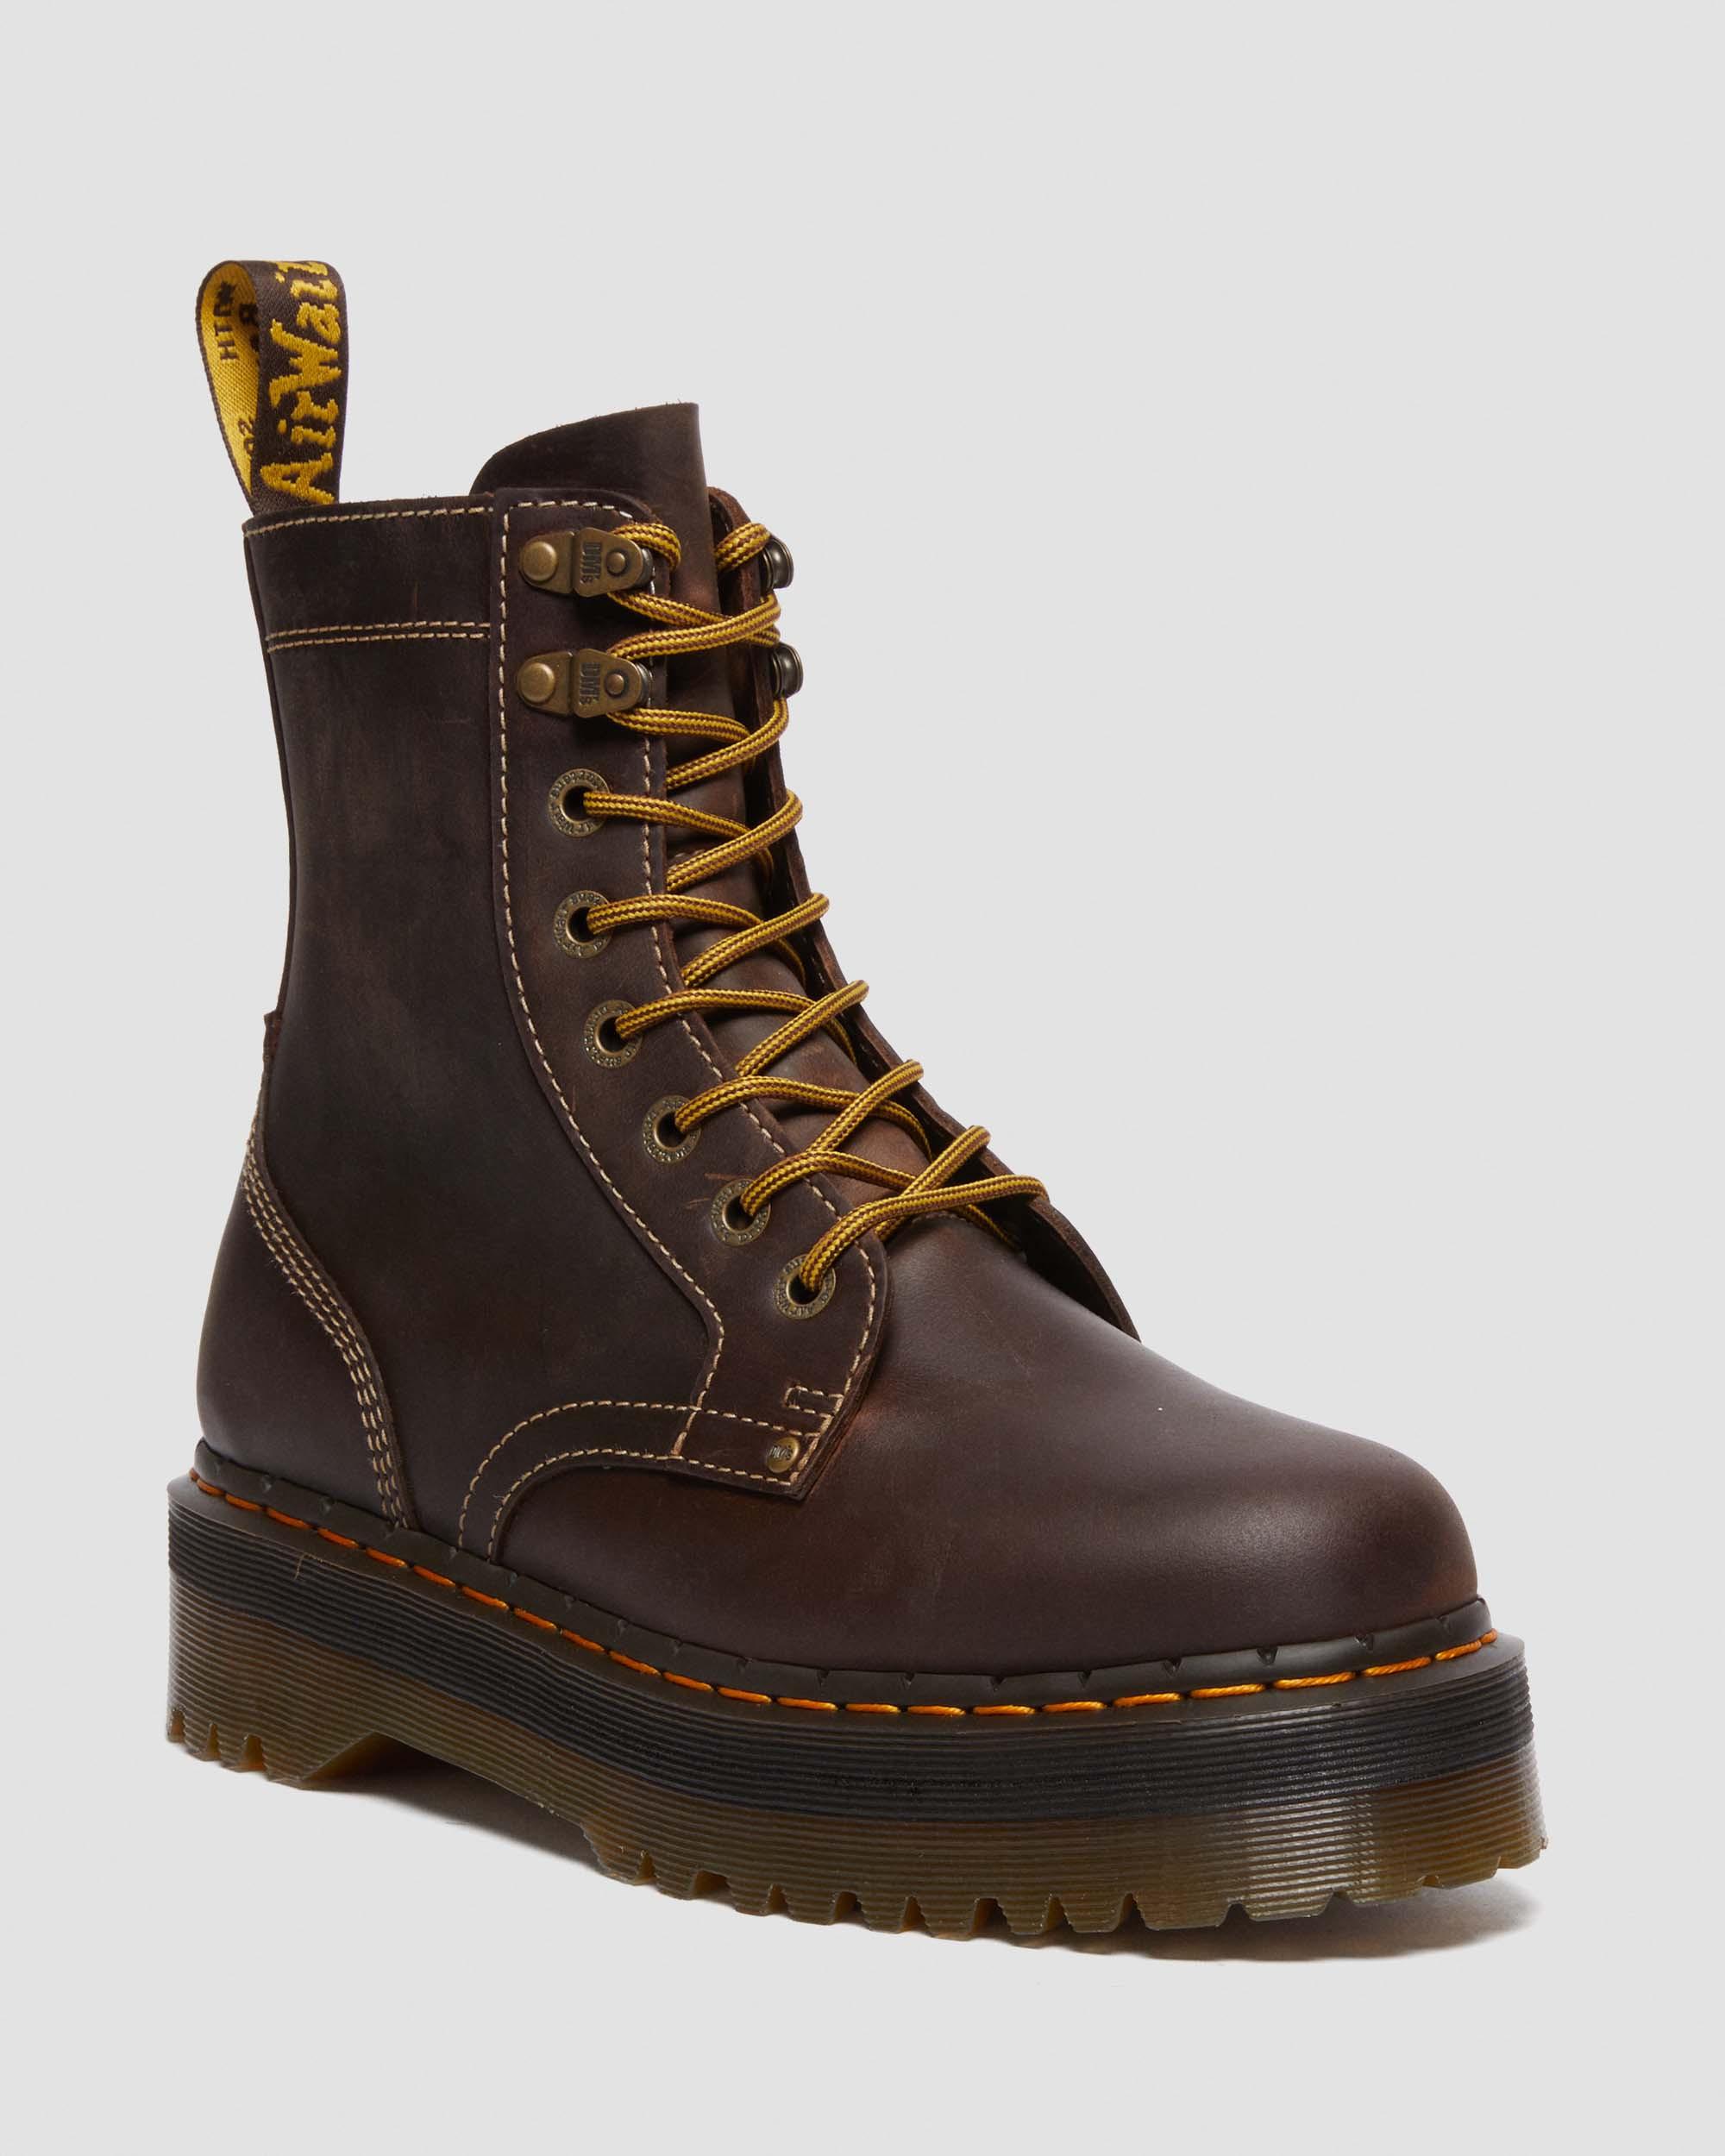 Dr. Martens Jadon Lace-Up Boots at Free People in Brown, Size: US 7